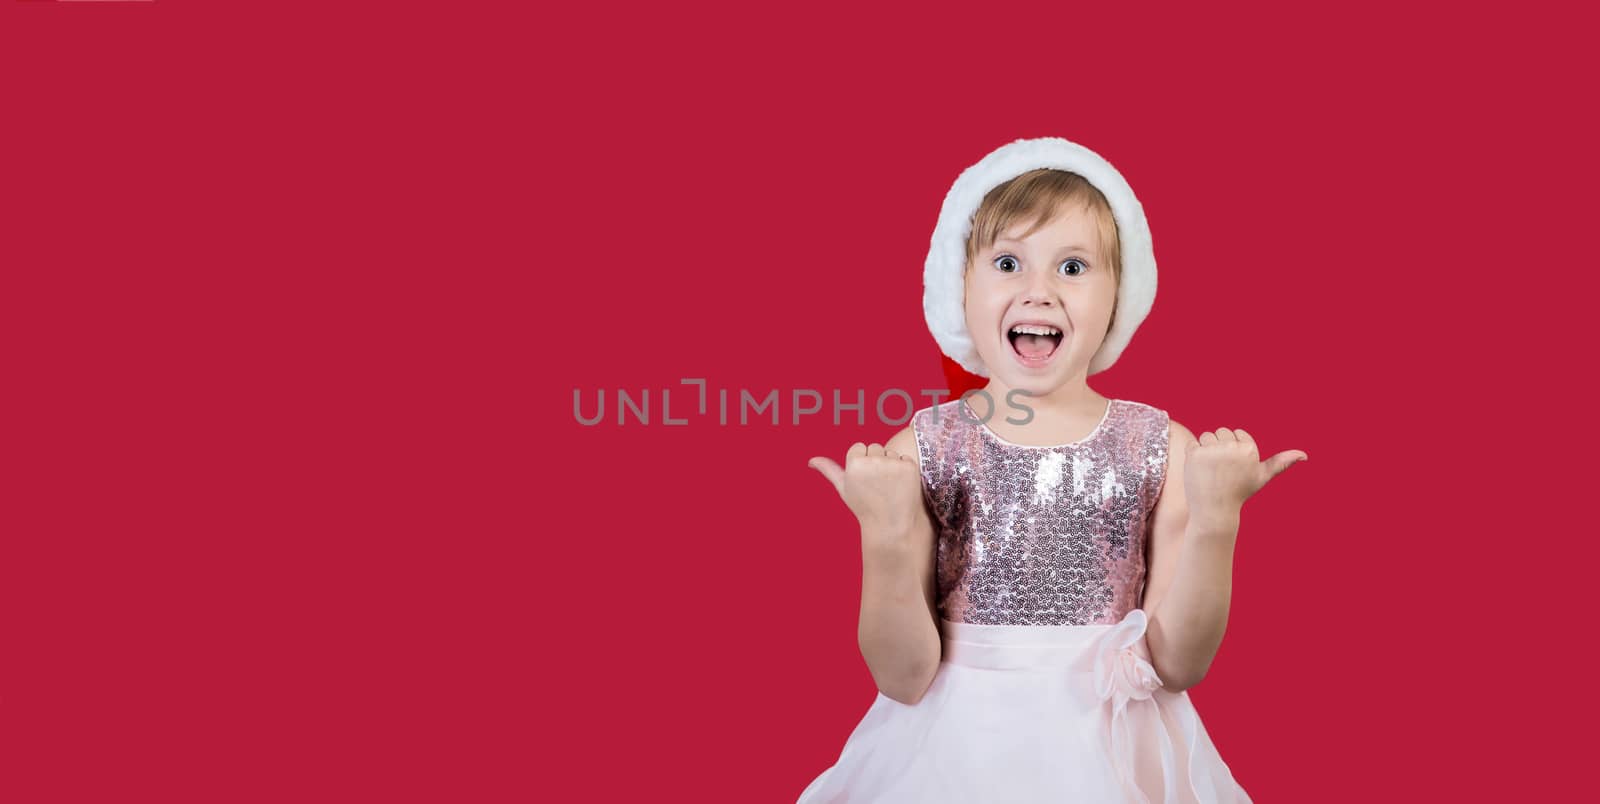 Surprised funny cacusian cute child girl in santa hat looking at the camera, shouting happily and showing thumbs up isolated on red background. Merry Christmas presents shopping sale..